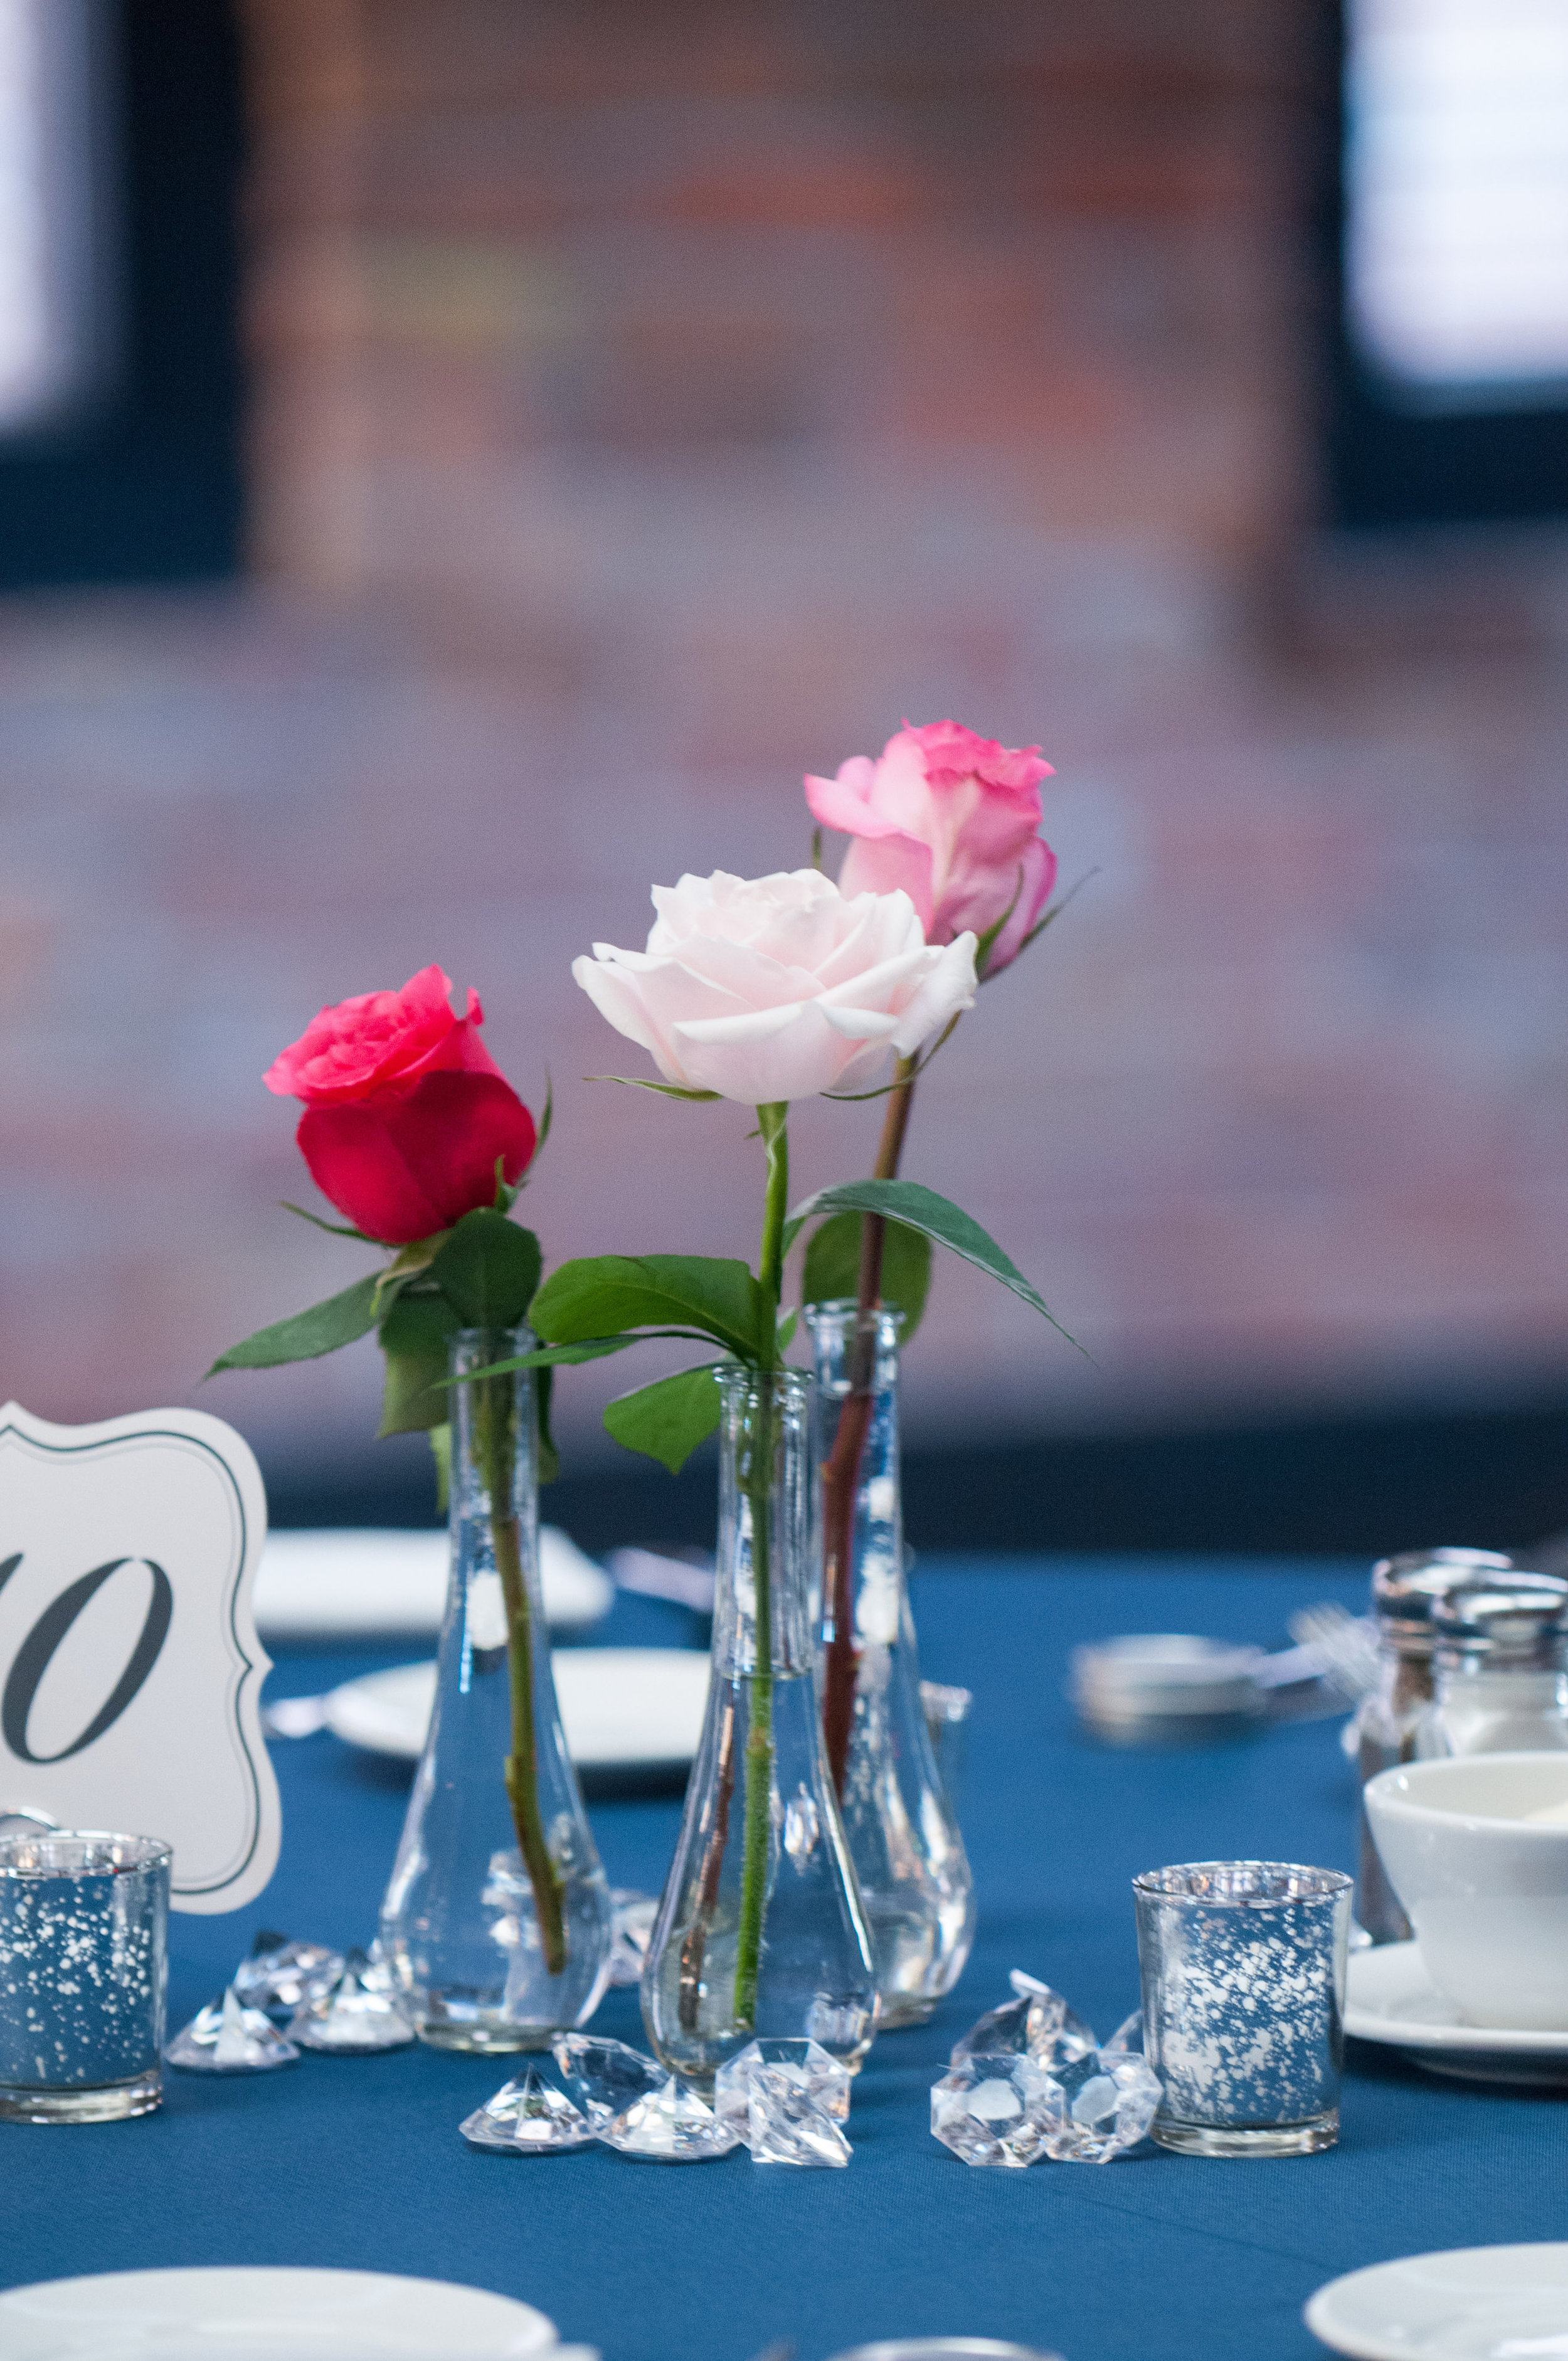 Photography:&nbsp; Coopersmith Photography &nbsp;| Planner: The Simply Elegant Group | DJ:&nbsp; Adagio Djay Entertainment &nbsp;| Bakery: Cocoa and Fig &nbsp;| Dress Designer: JenMar Creations &nbsp;| Floral Designer: Julia’s Blooms &nbsp;| Event Venue:&nbsp; The Riverside Room at Minneapolis Event Center